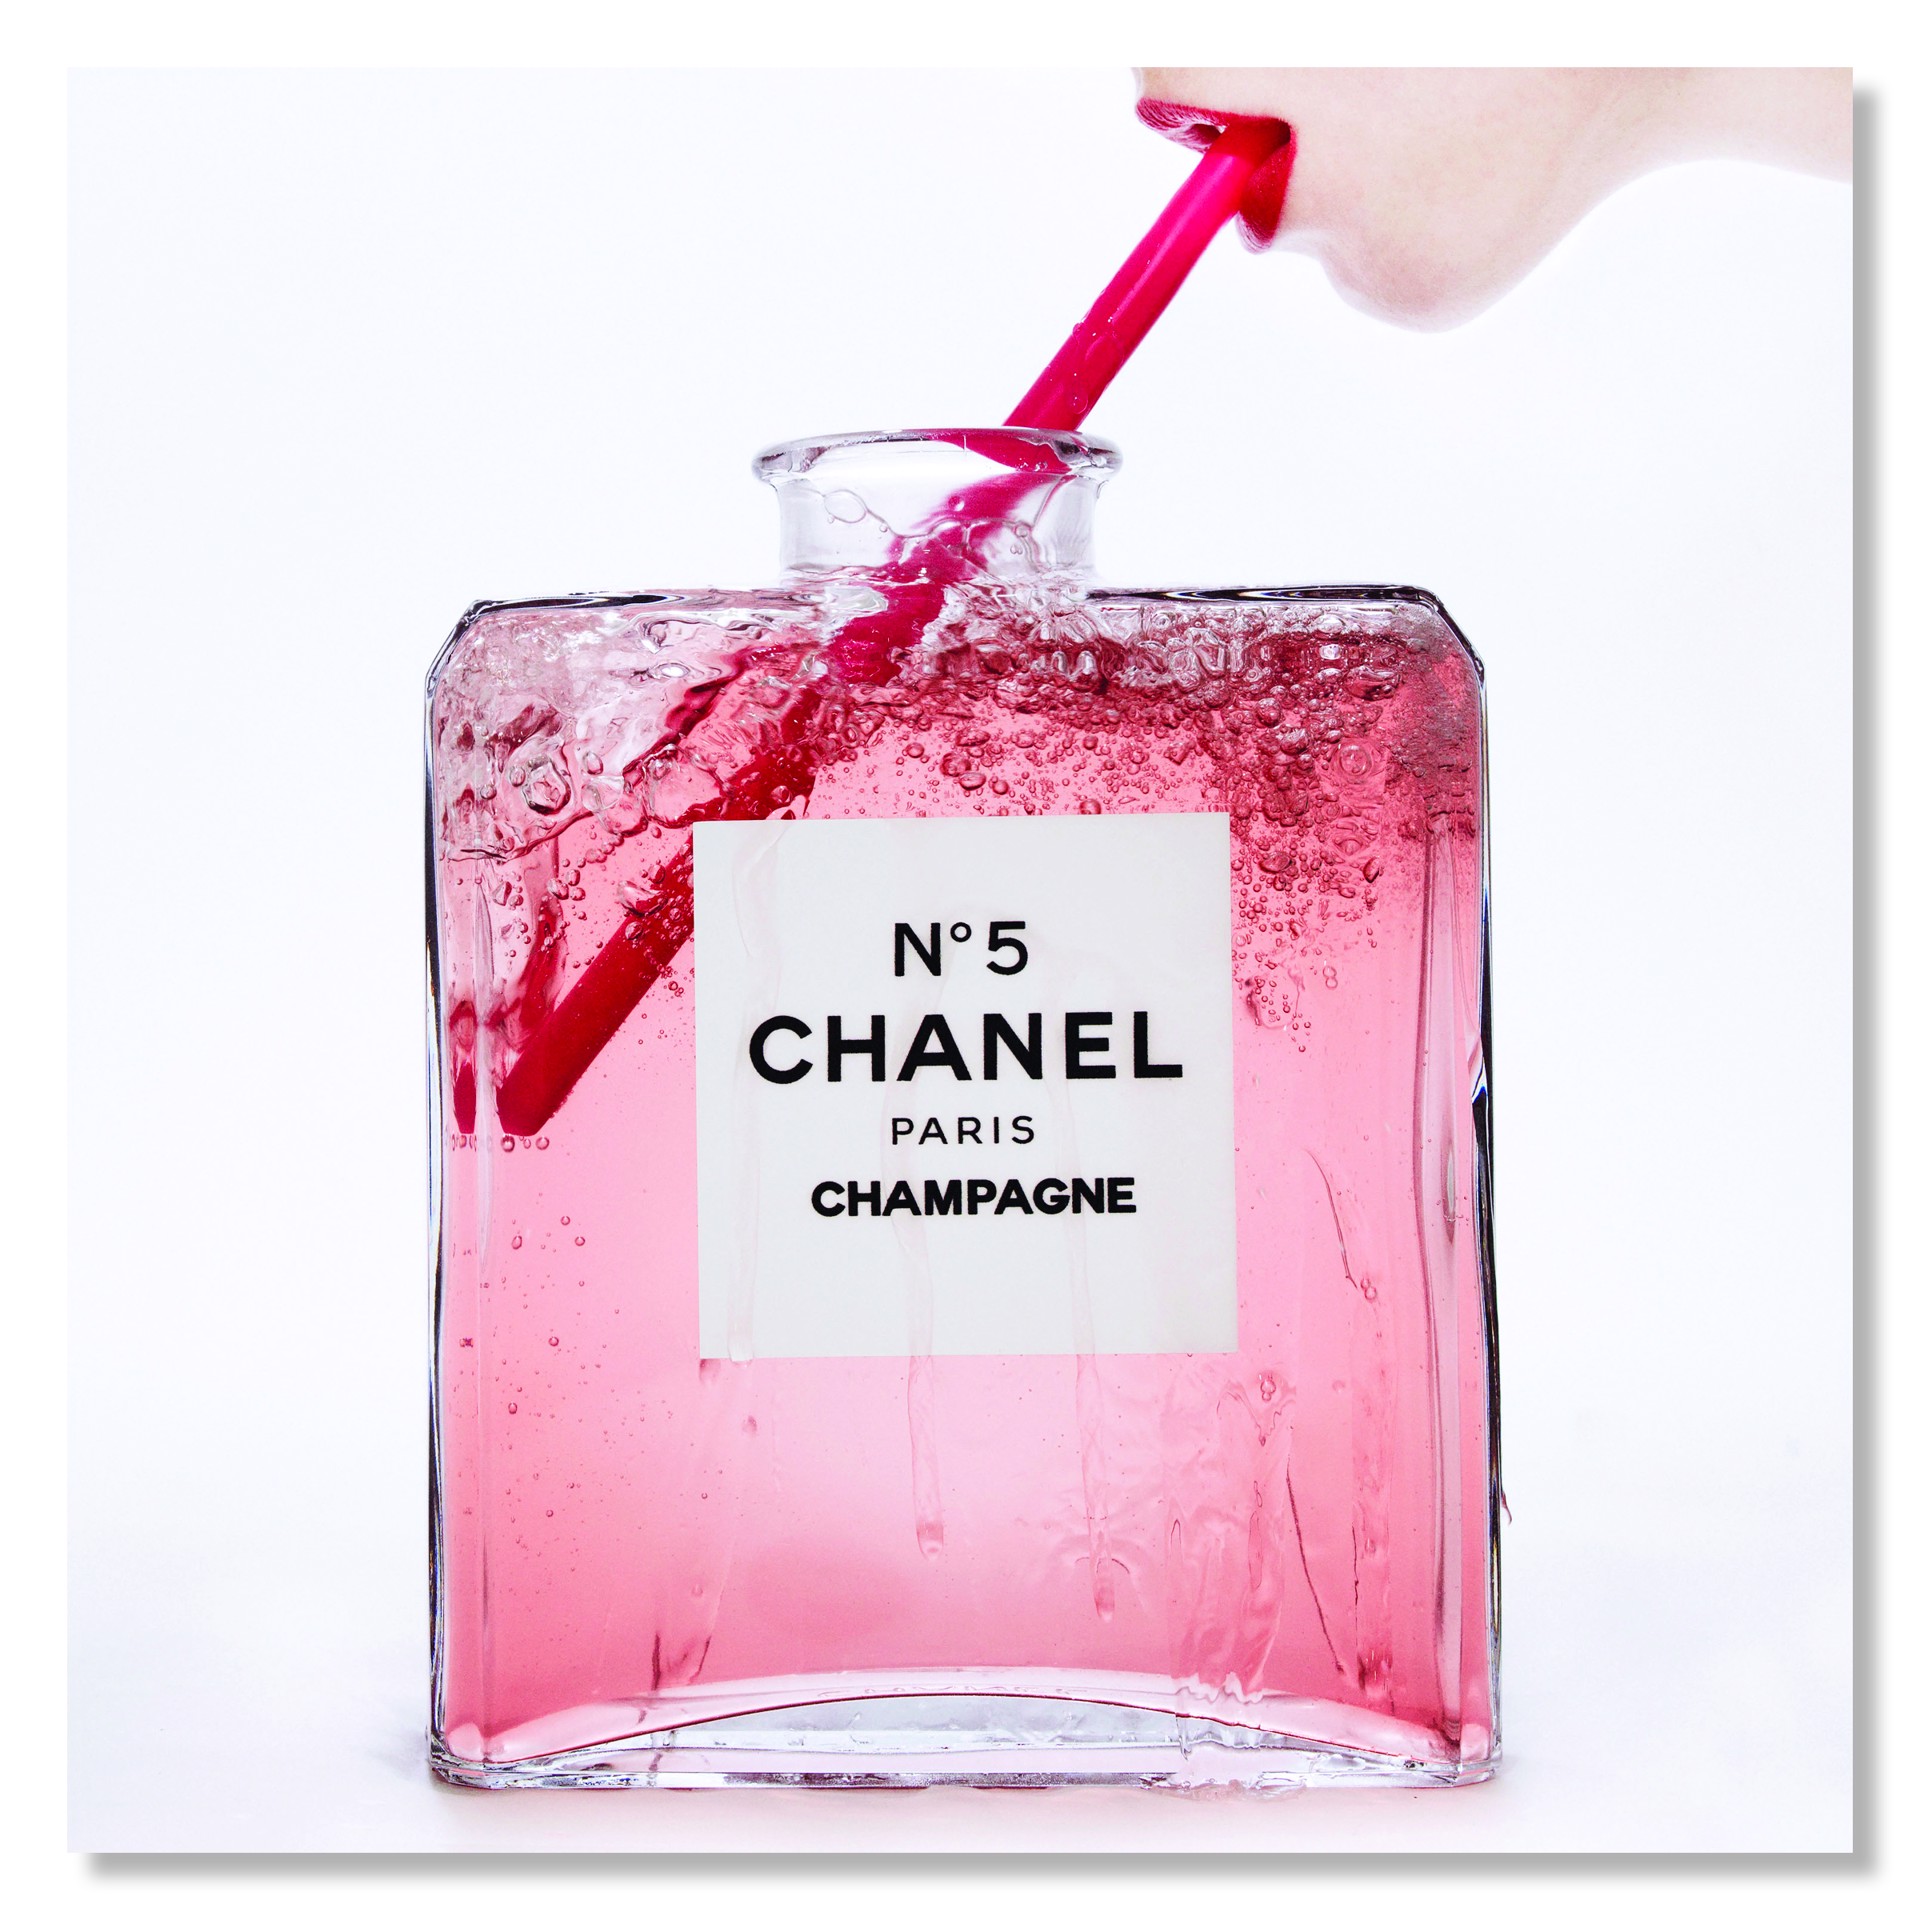 Chanel Champagne by Tyler Shields